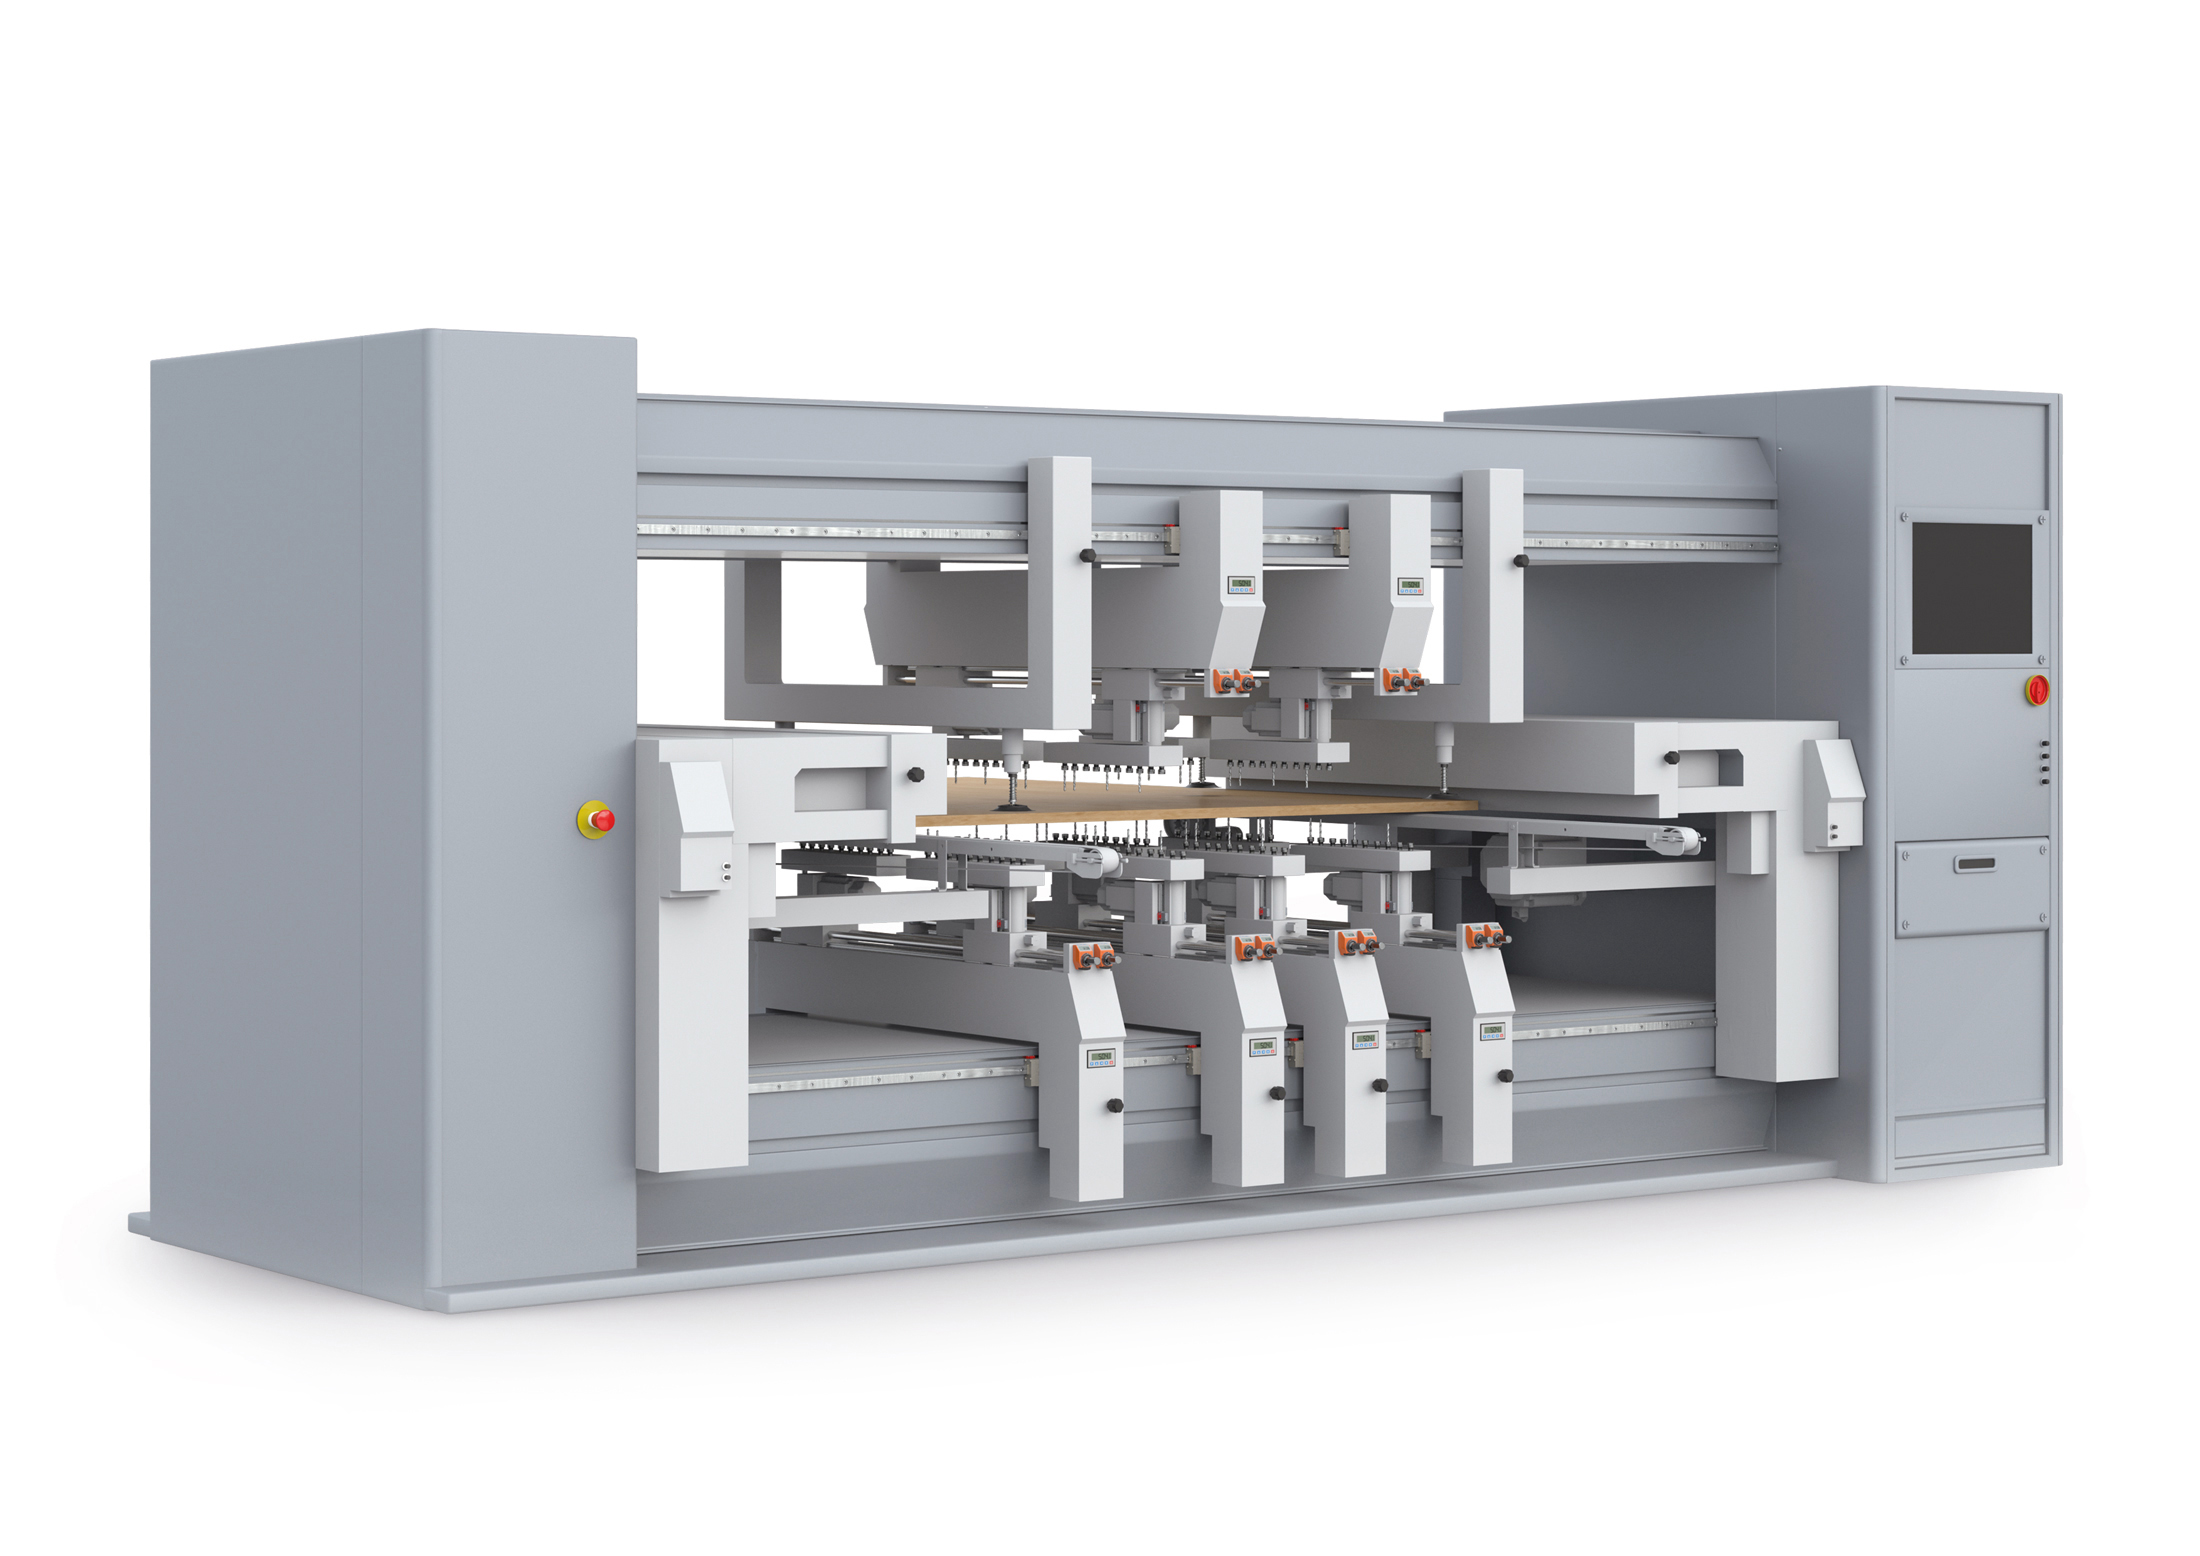 Positioning systems for dowel drilling machines by SIKO